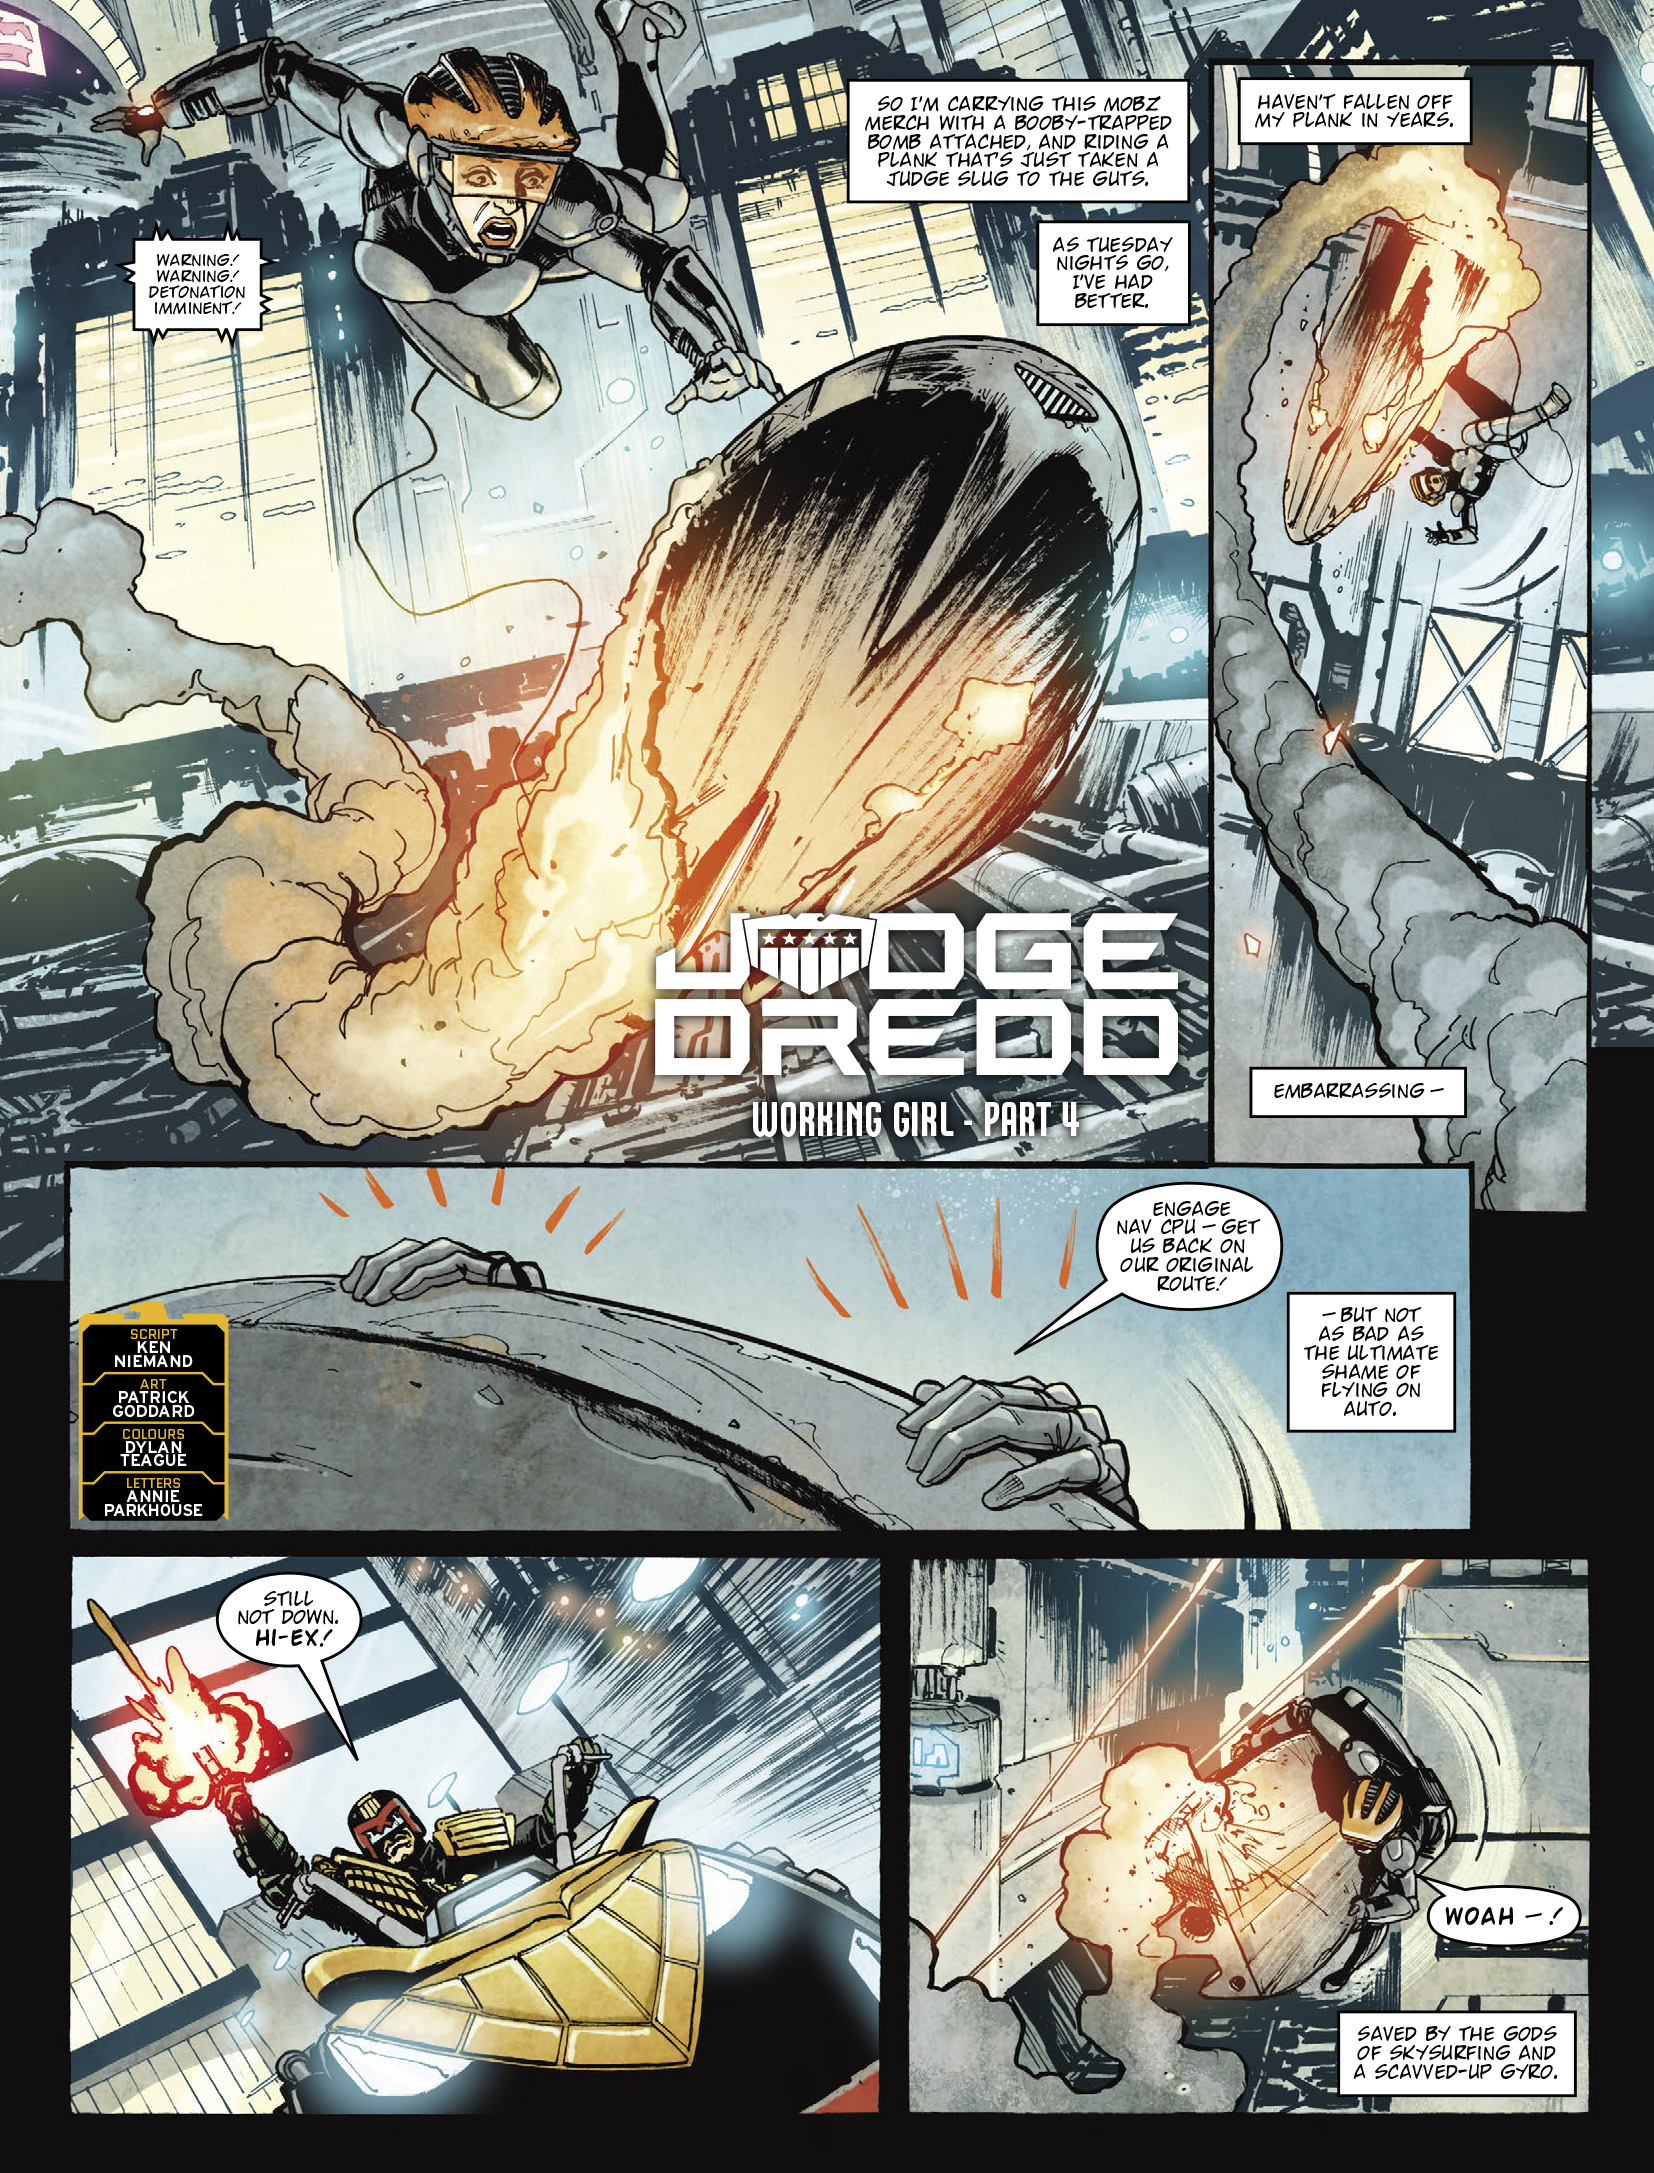 2000 AD: Chapter 2266 - Page 3